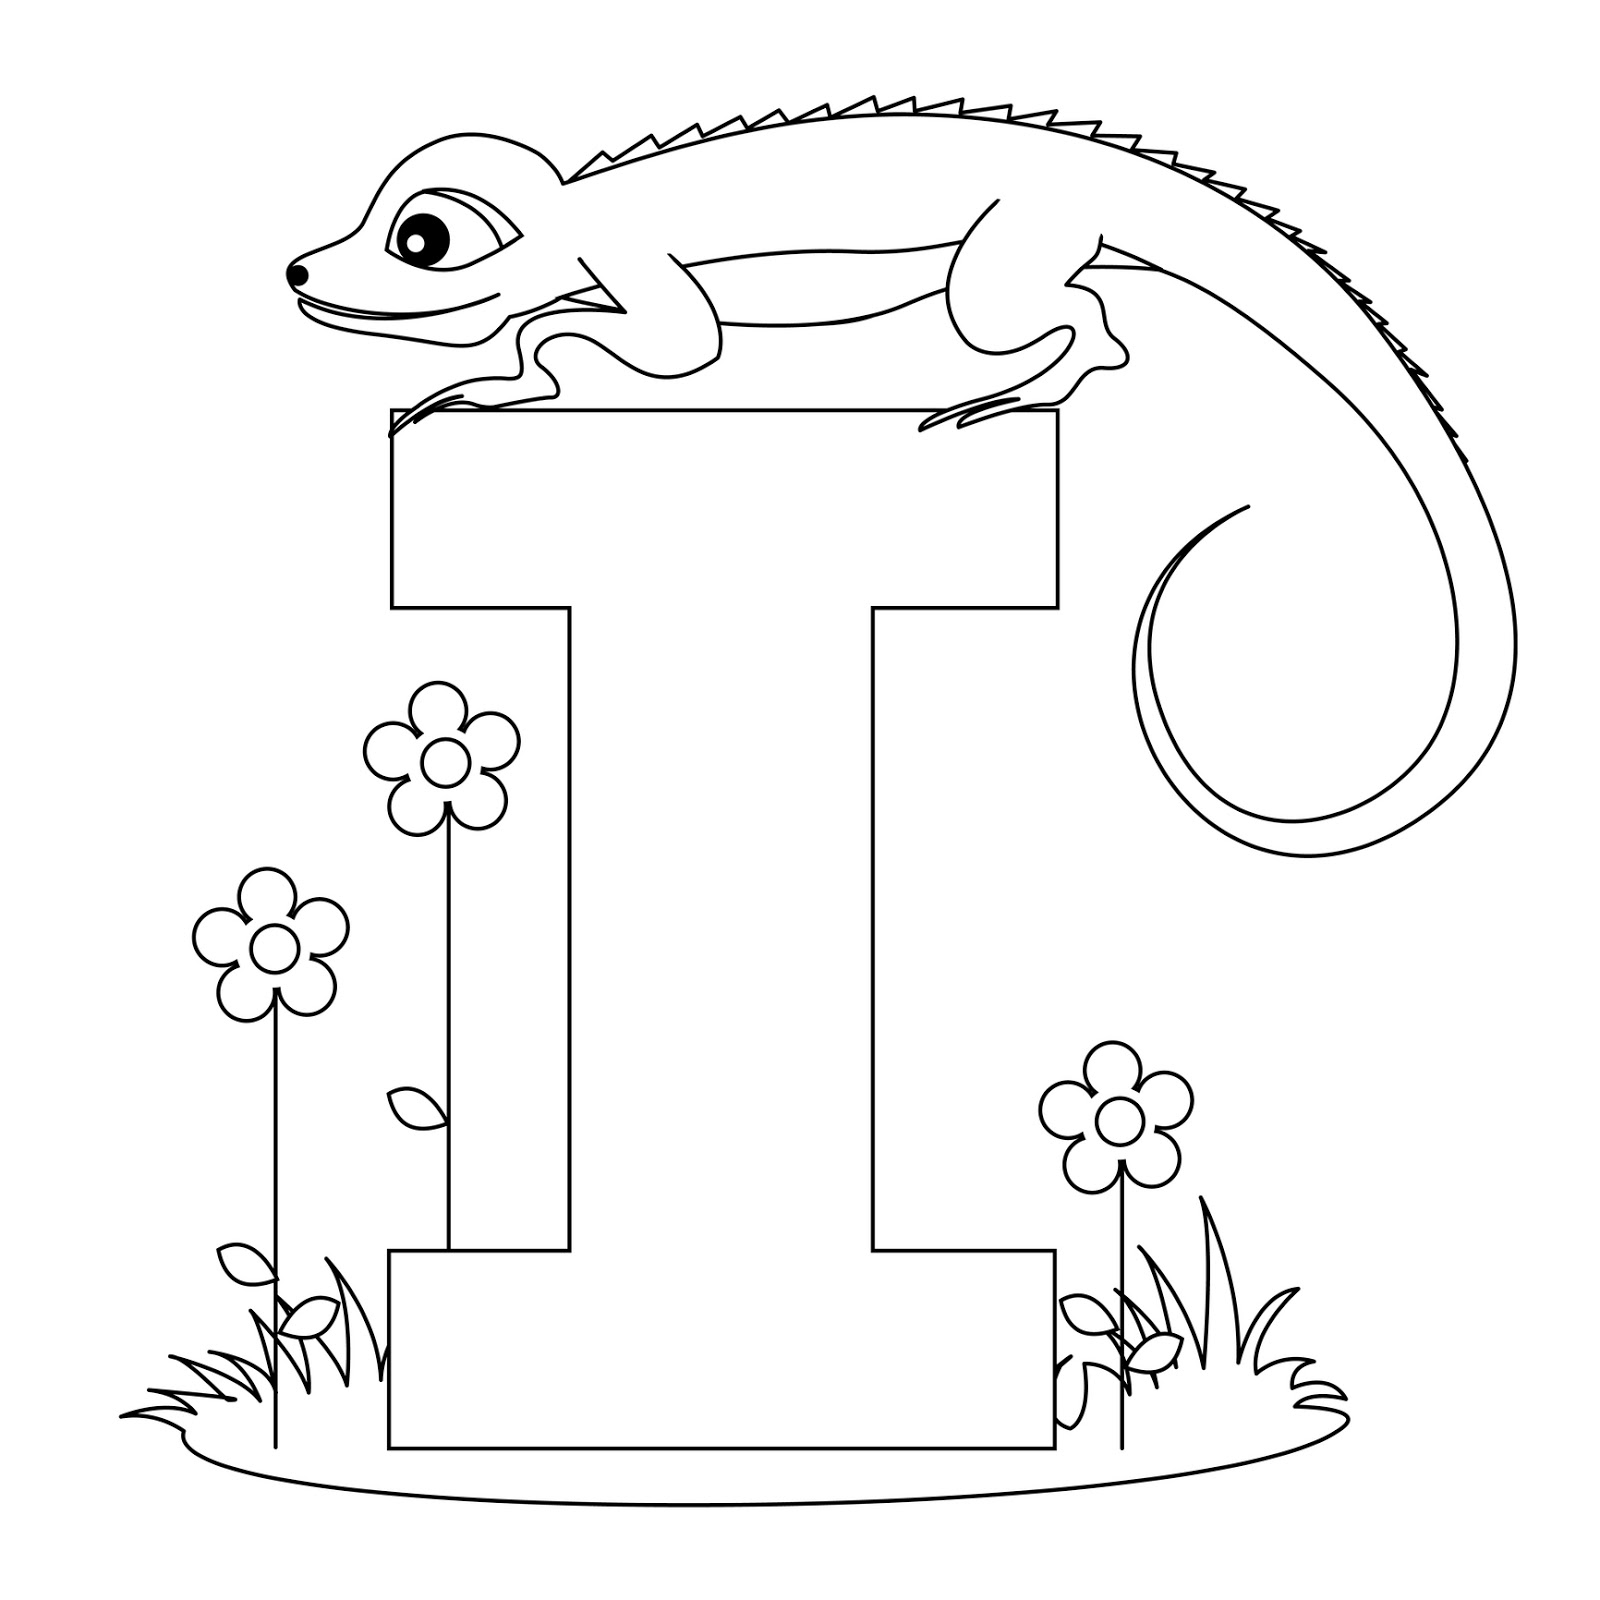 Animal Alphabet Letter I Coloring Pages Image